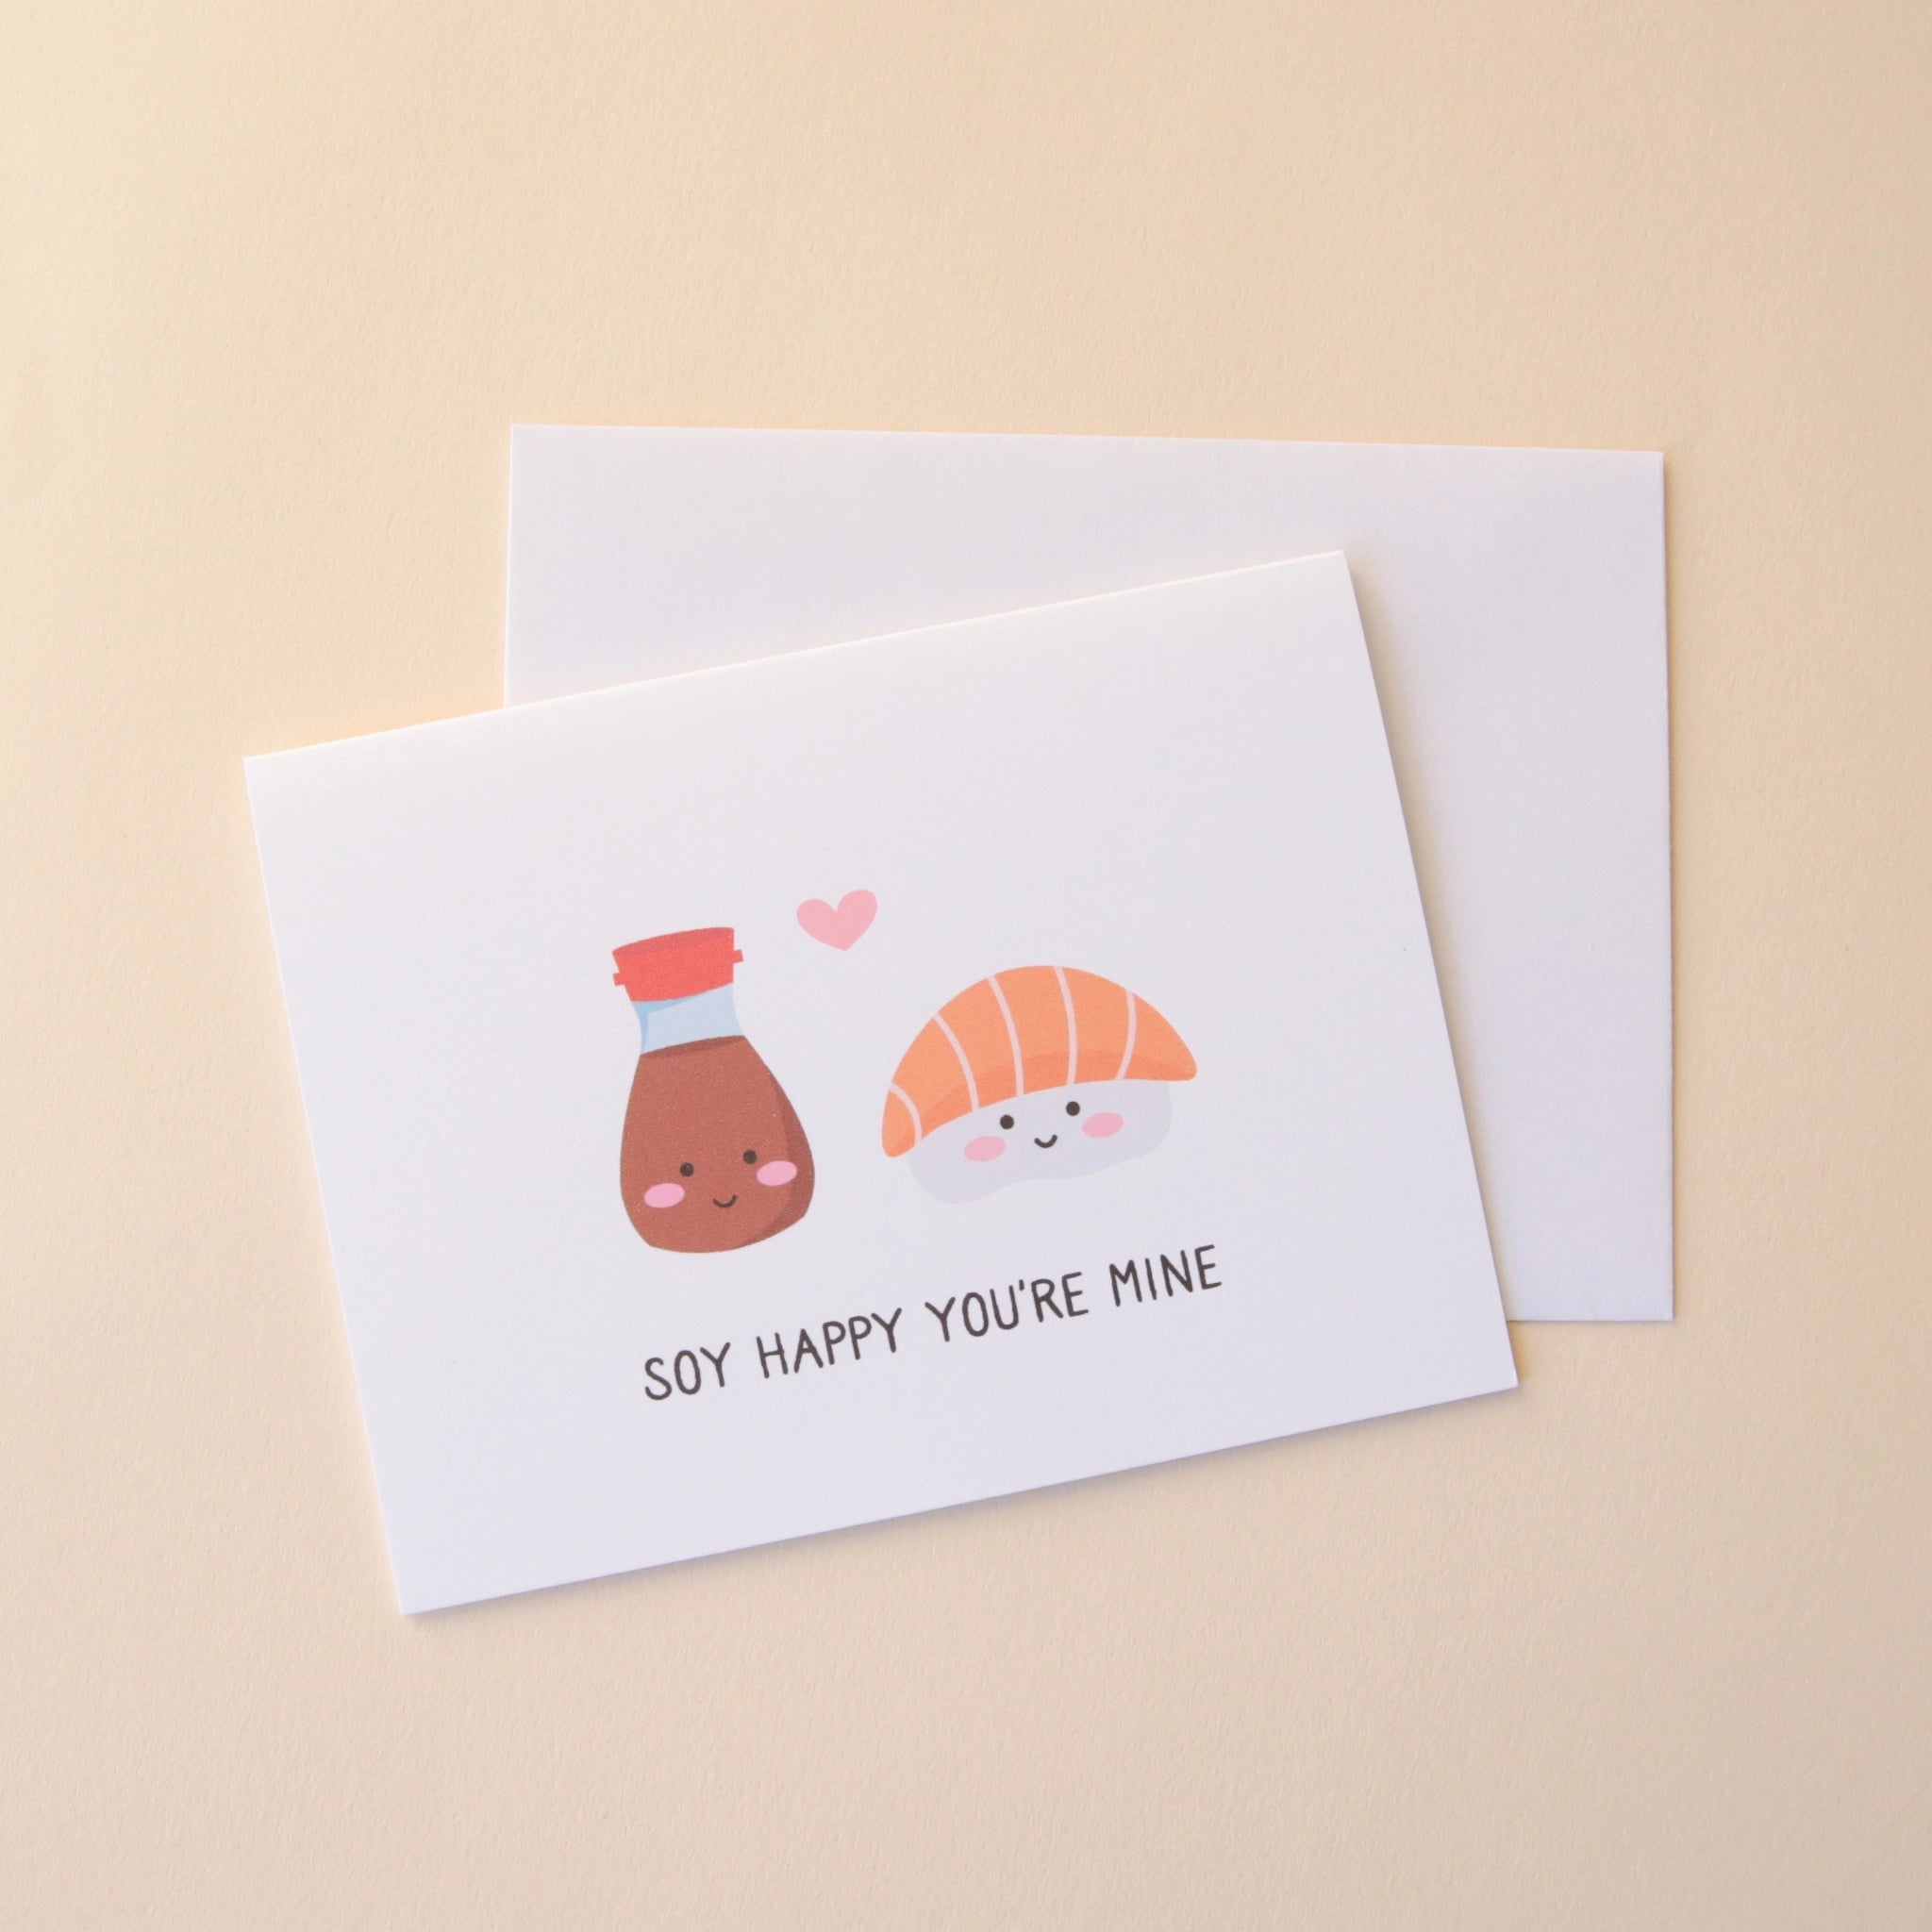 A white card with an illustration of a salmon sashimi and soy sauce both with smiling faces and a small pink heart in between them as well as text underneath that reads, "Soy Happy You're Mine" in black letters.